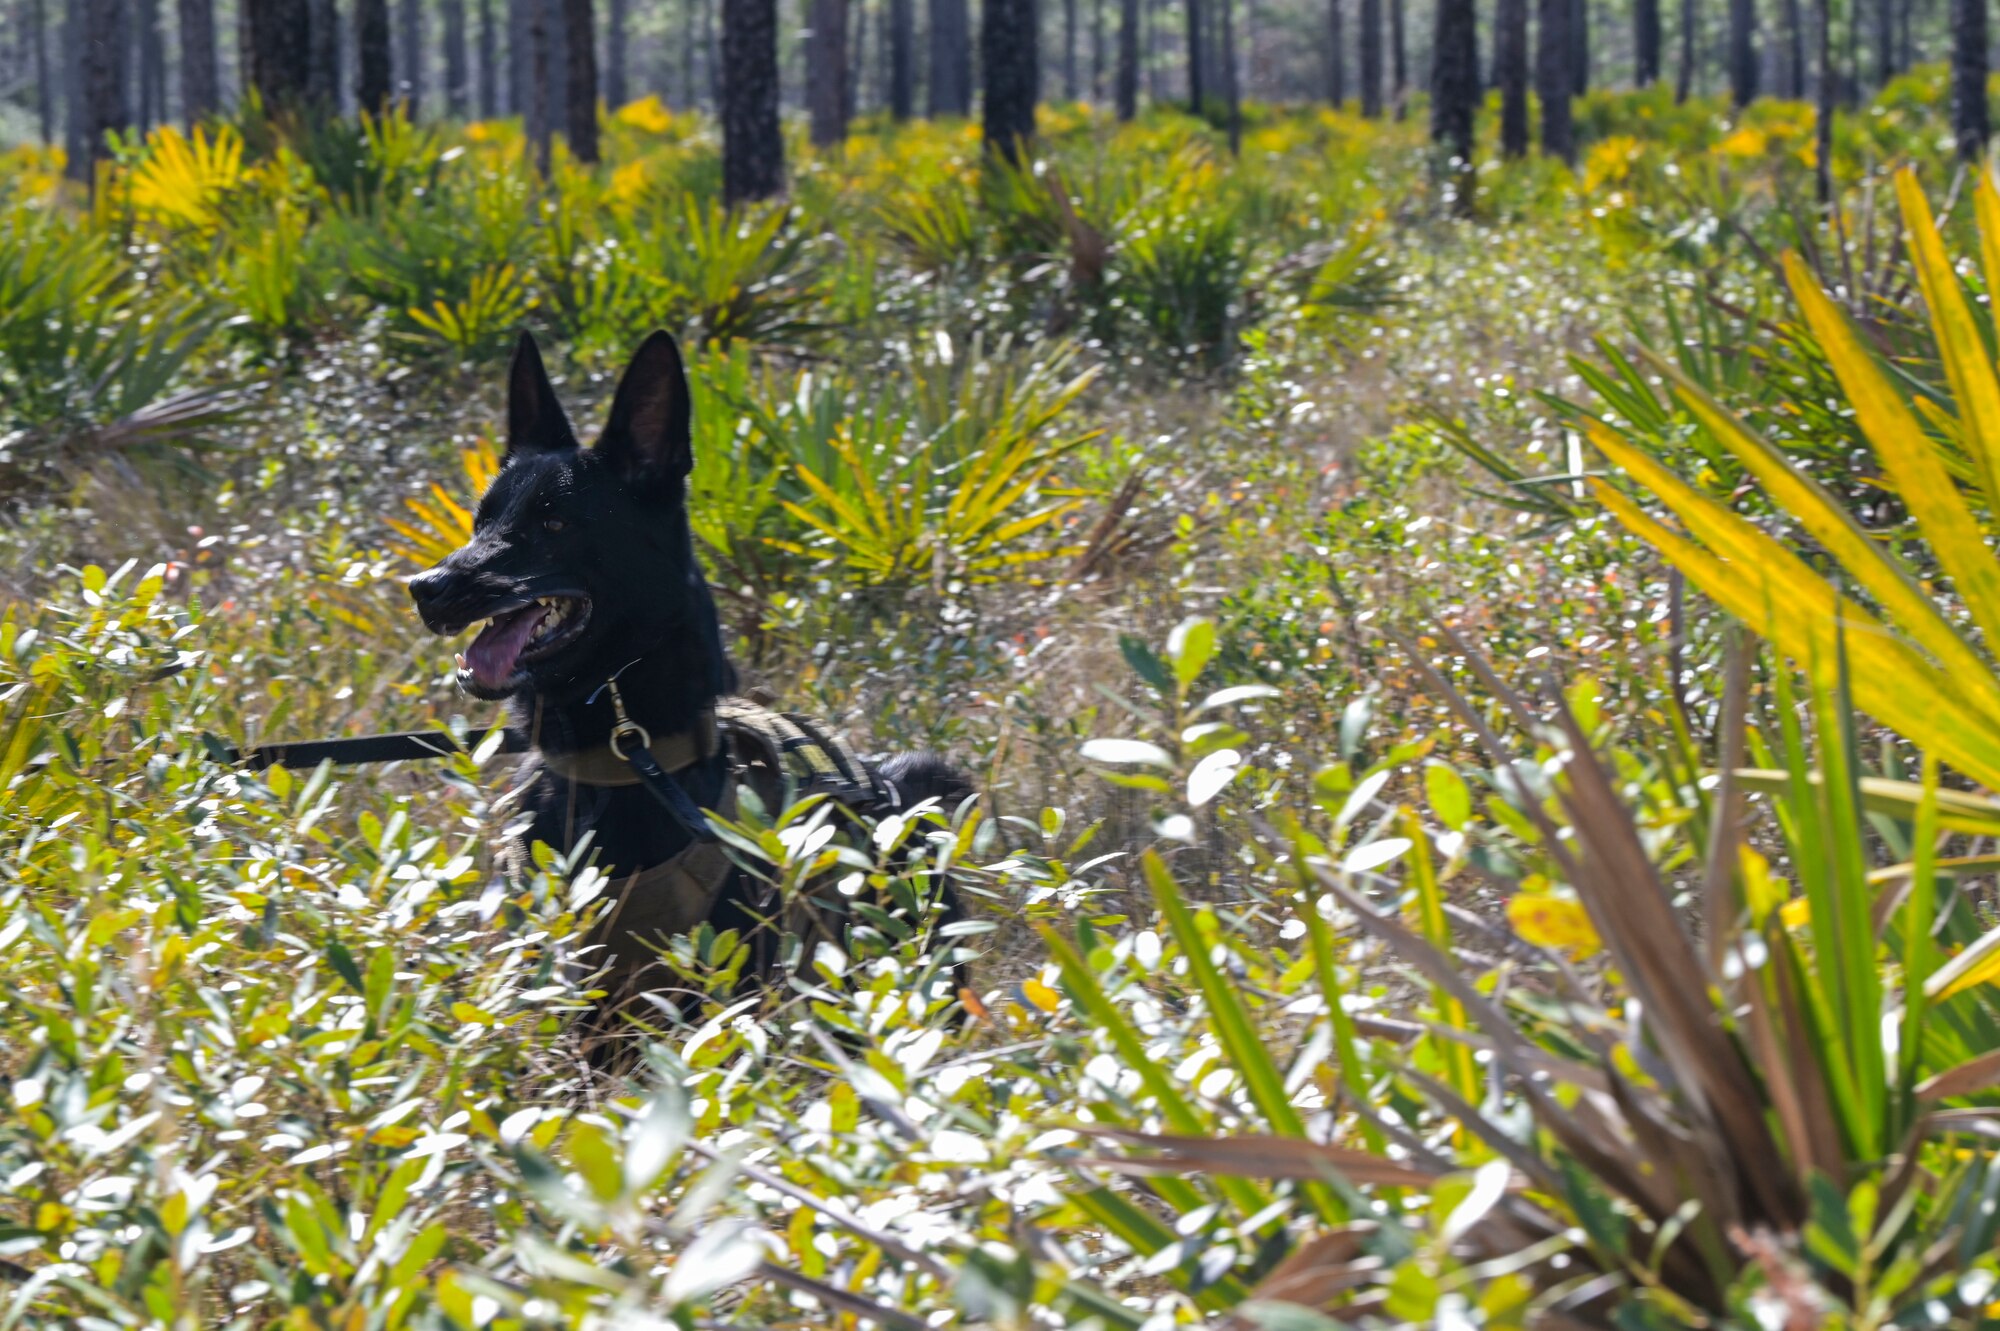 Rex, a 1st Special Operations Security Forces Squadron military working dog, runs through the woods.